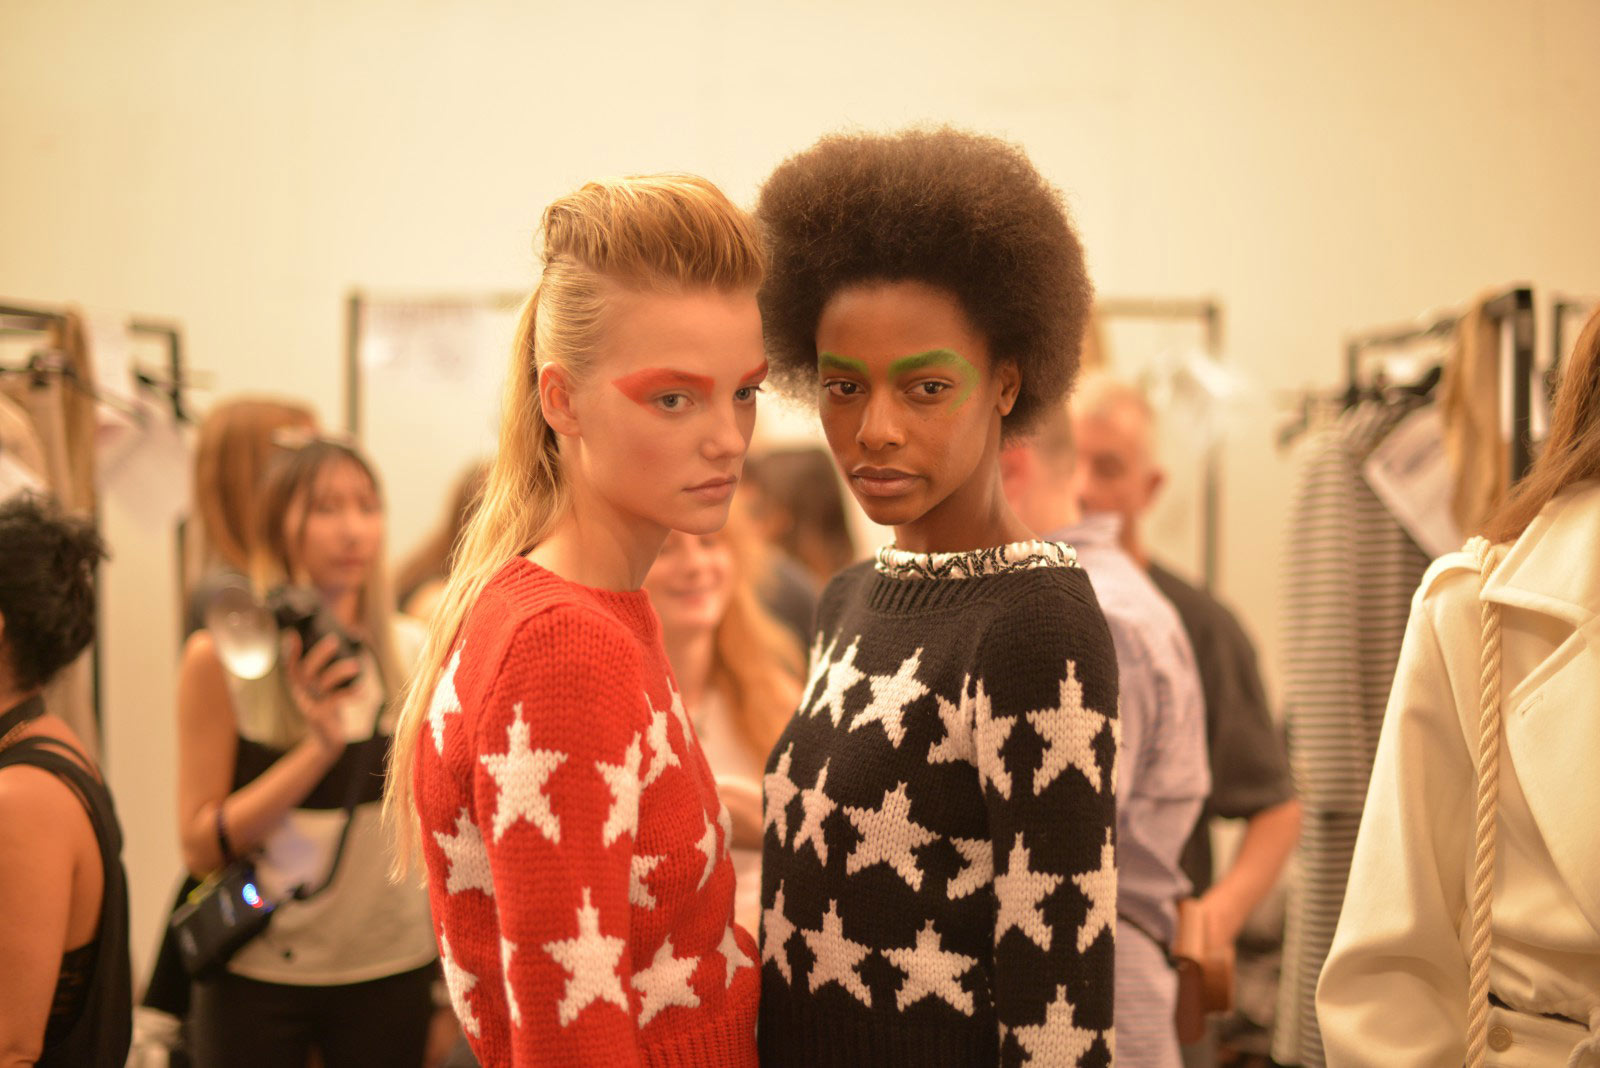 Roos Abels and Karly Loyce backstage at Max Mara SS16 fashion show in milan